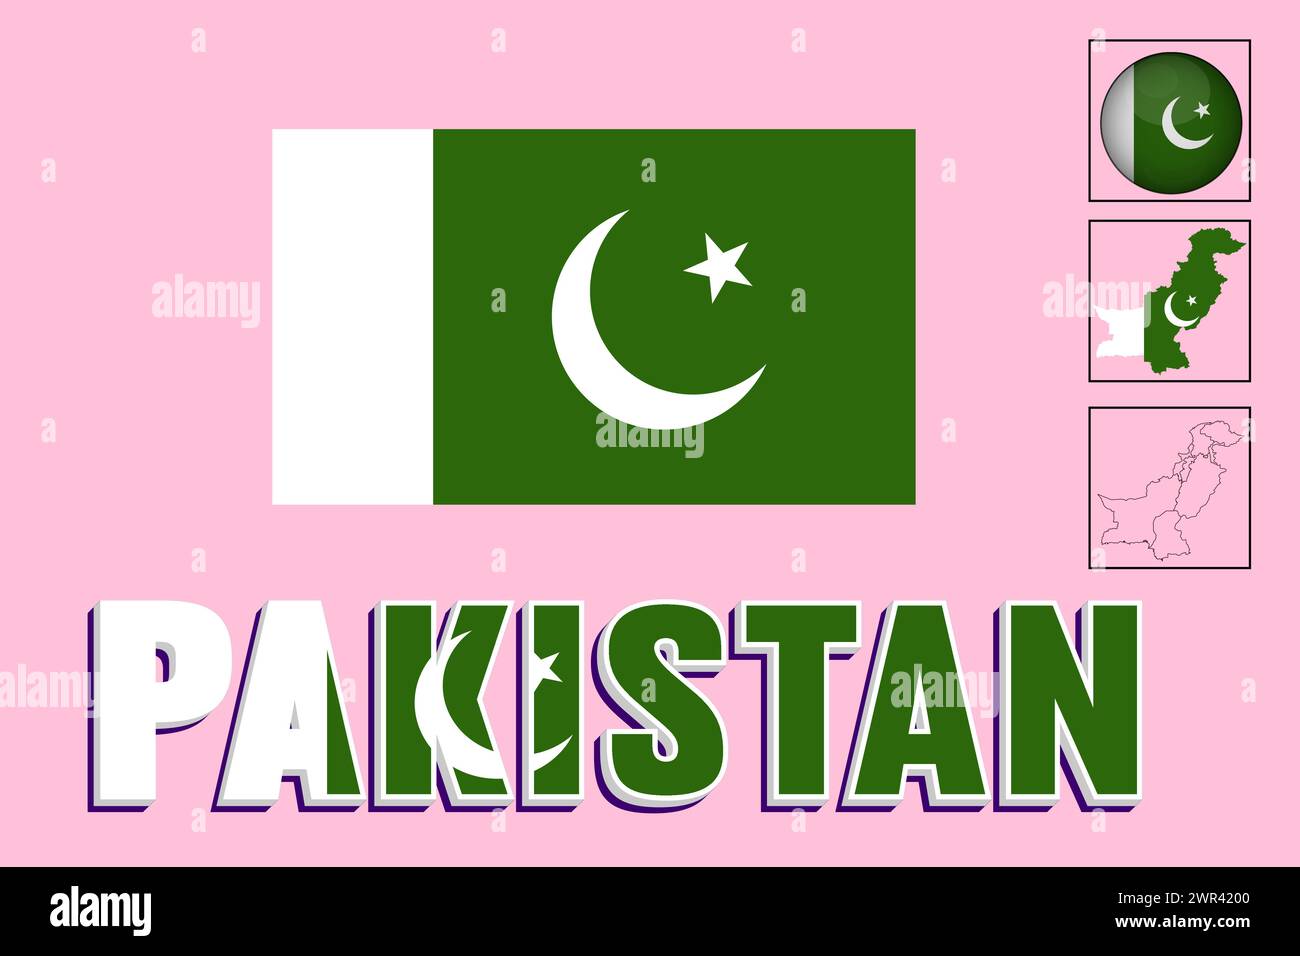 Pakistan flag and map in vector illustration Stock Vector